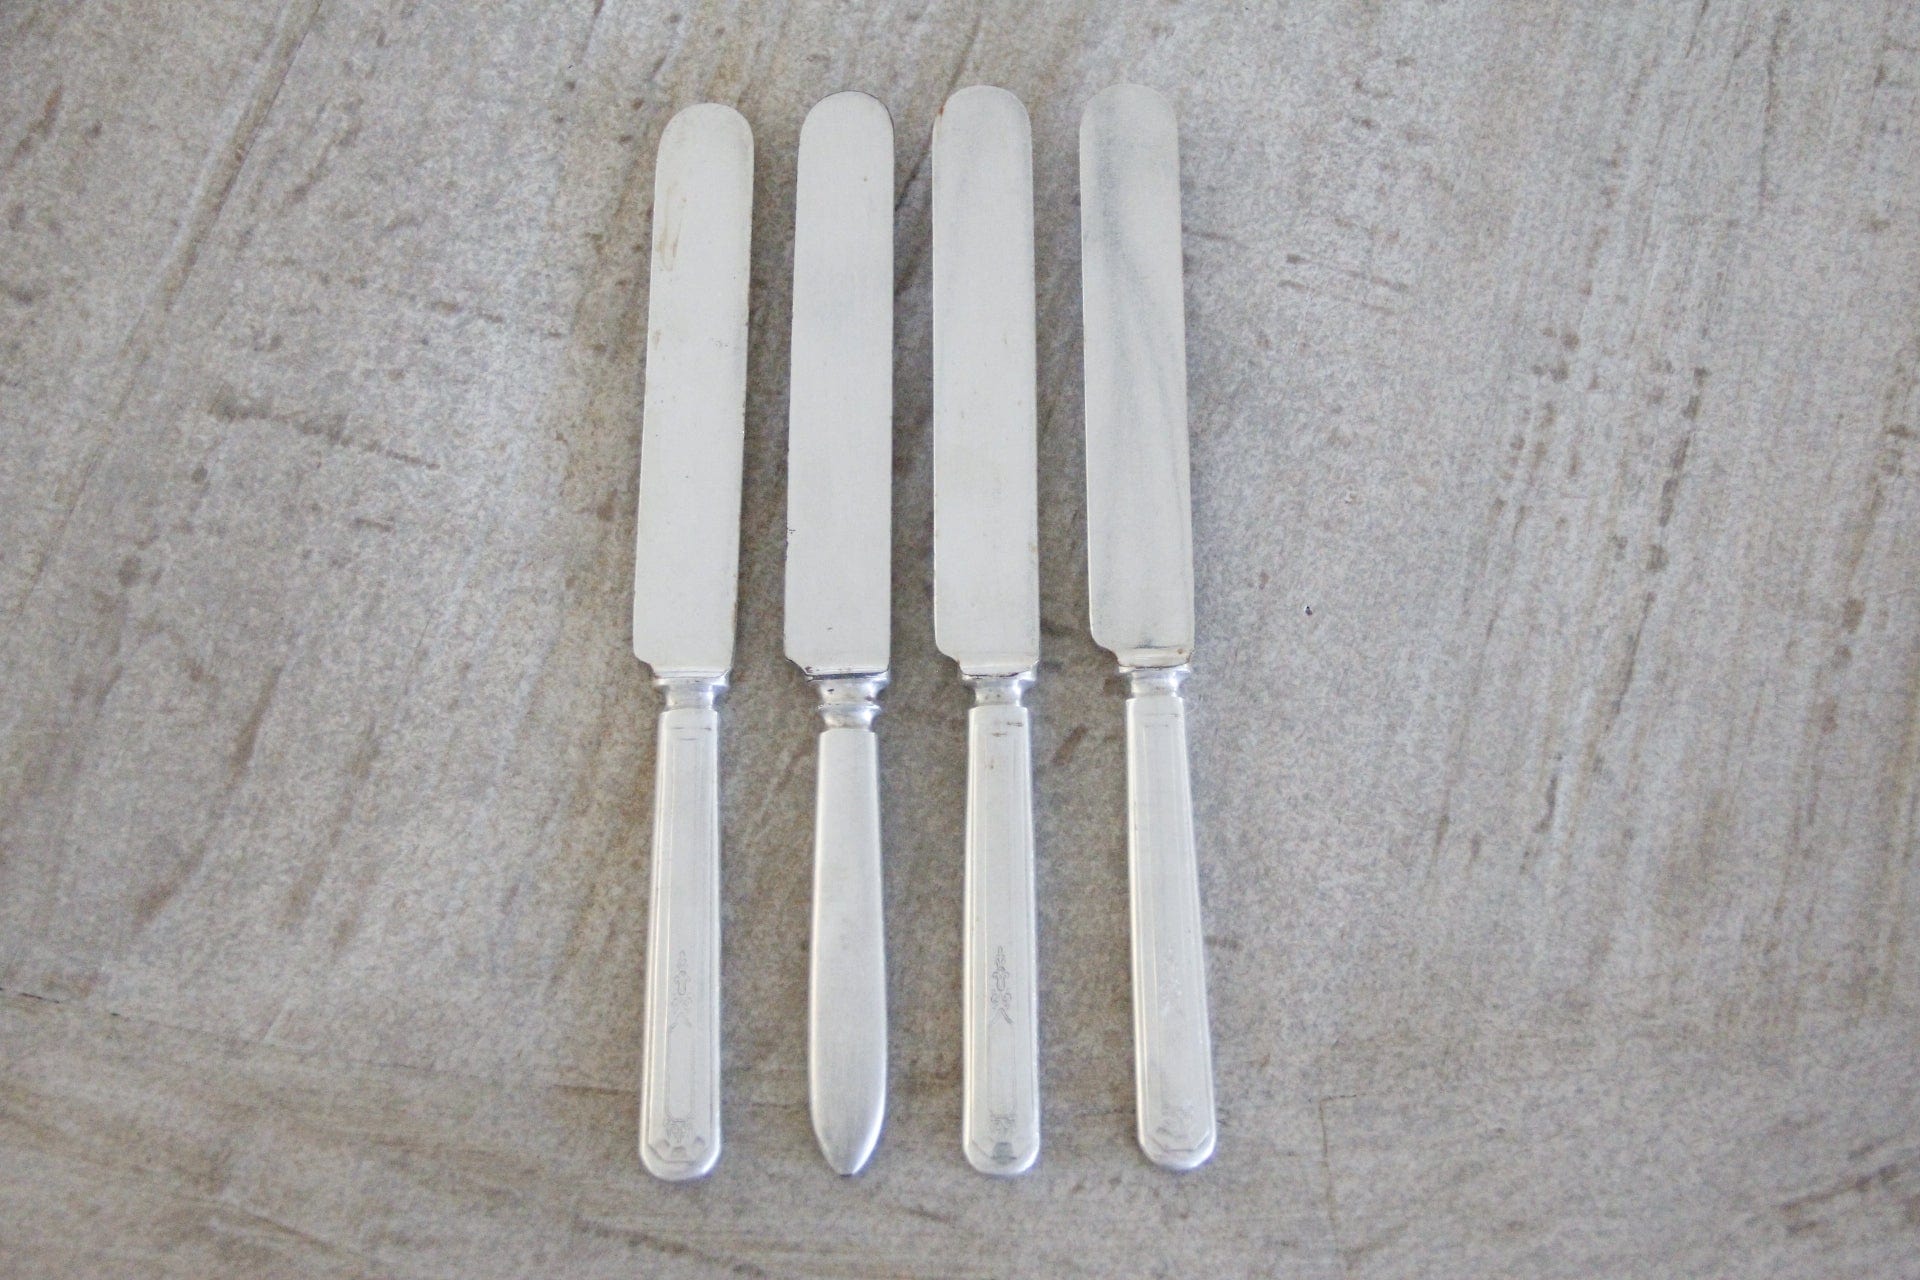 Antique Silver Plated Blunt Table Knife | Flatware 4 Mixed Pcs - Debra Hall Lifestyle